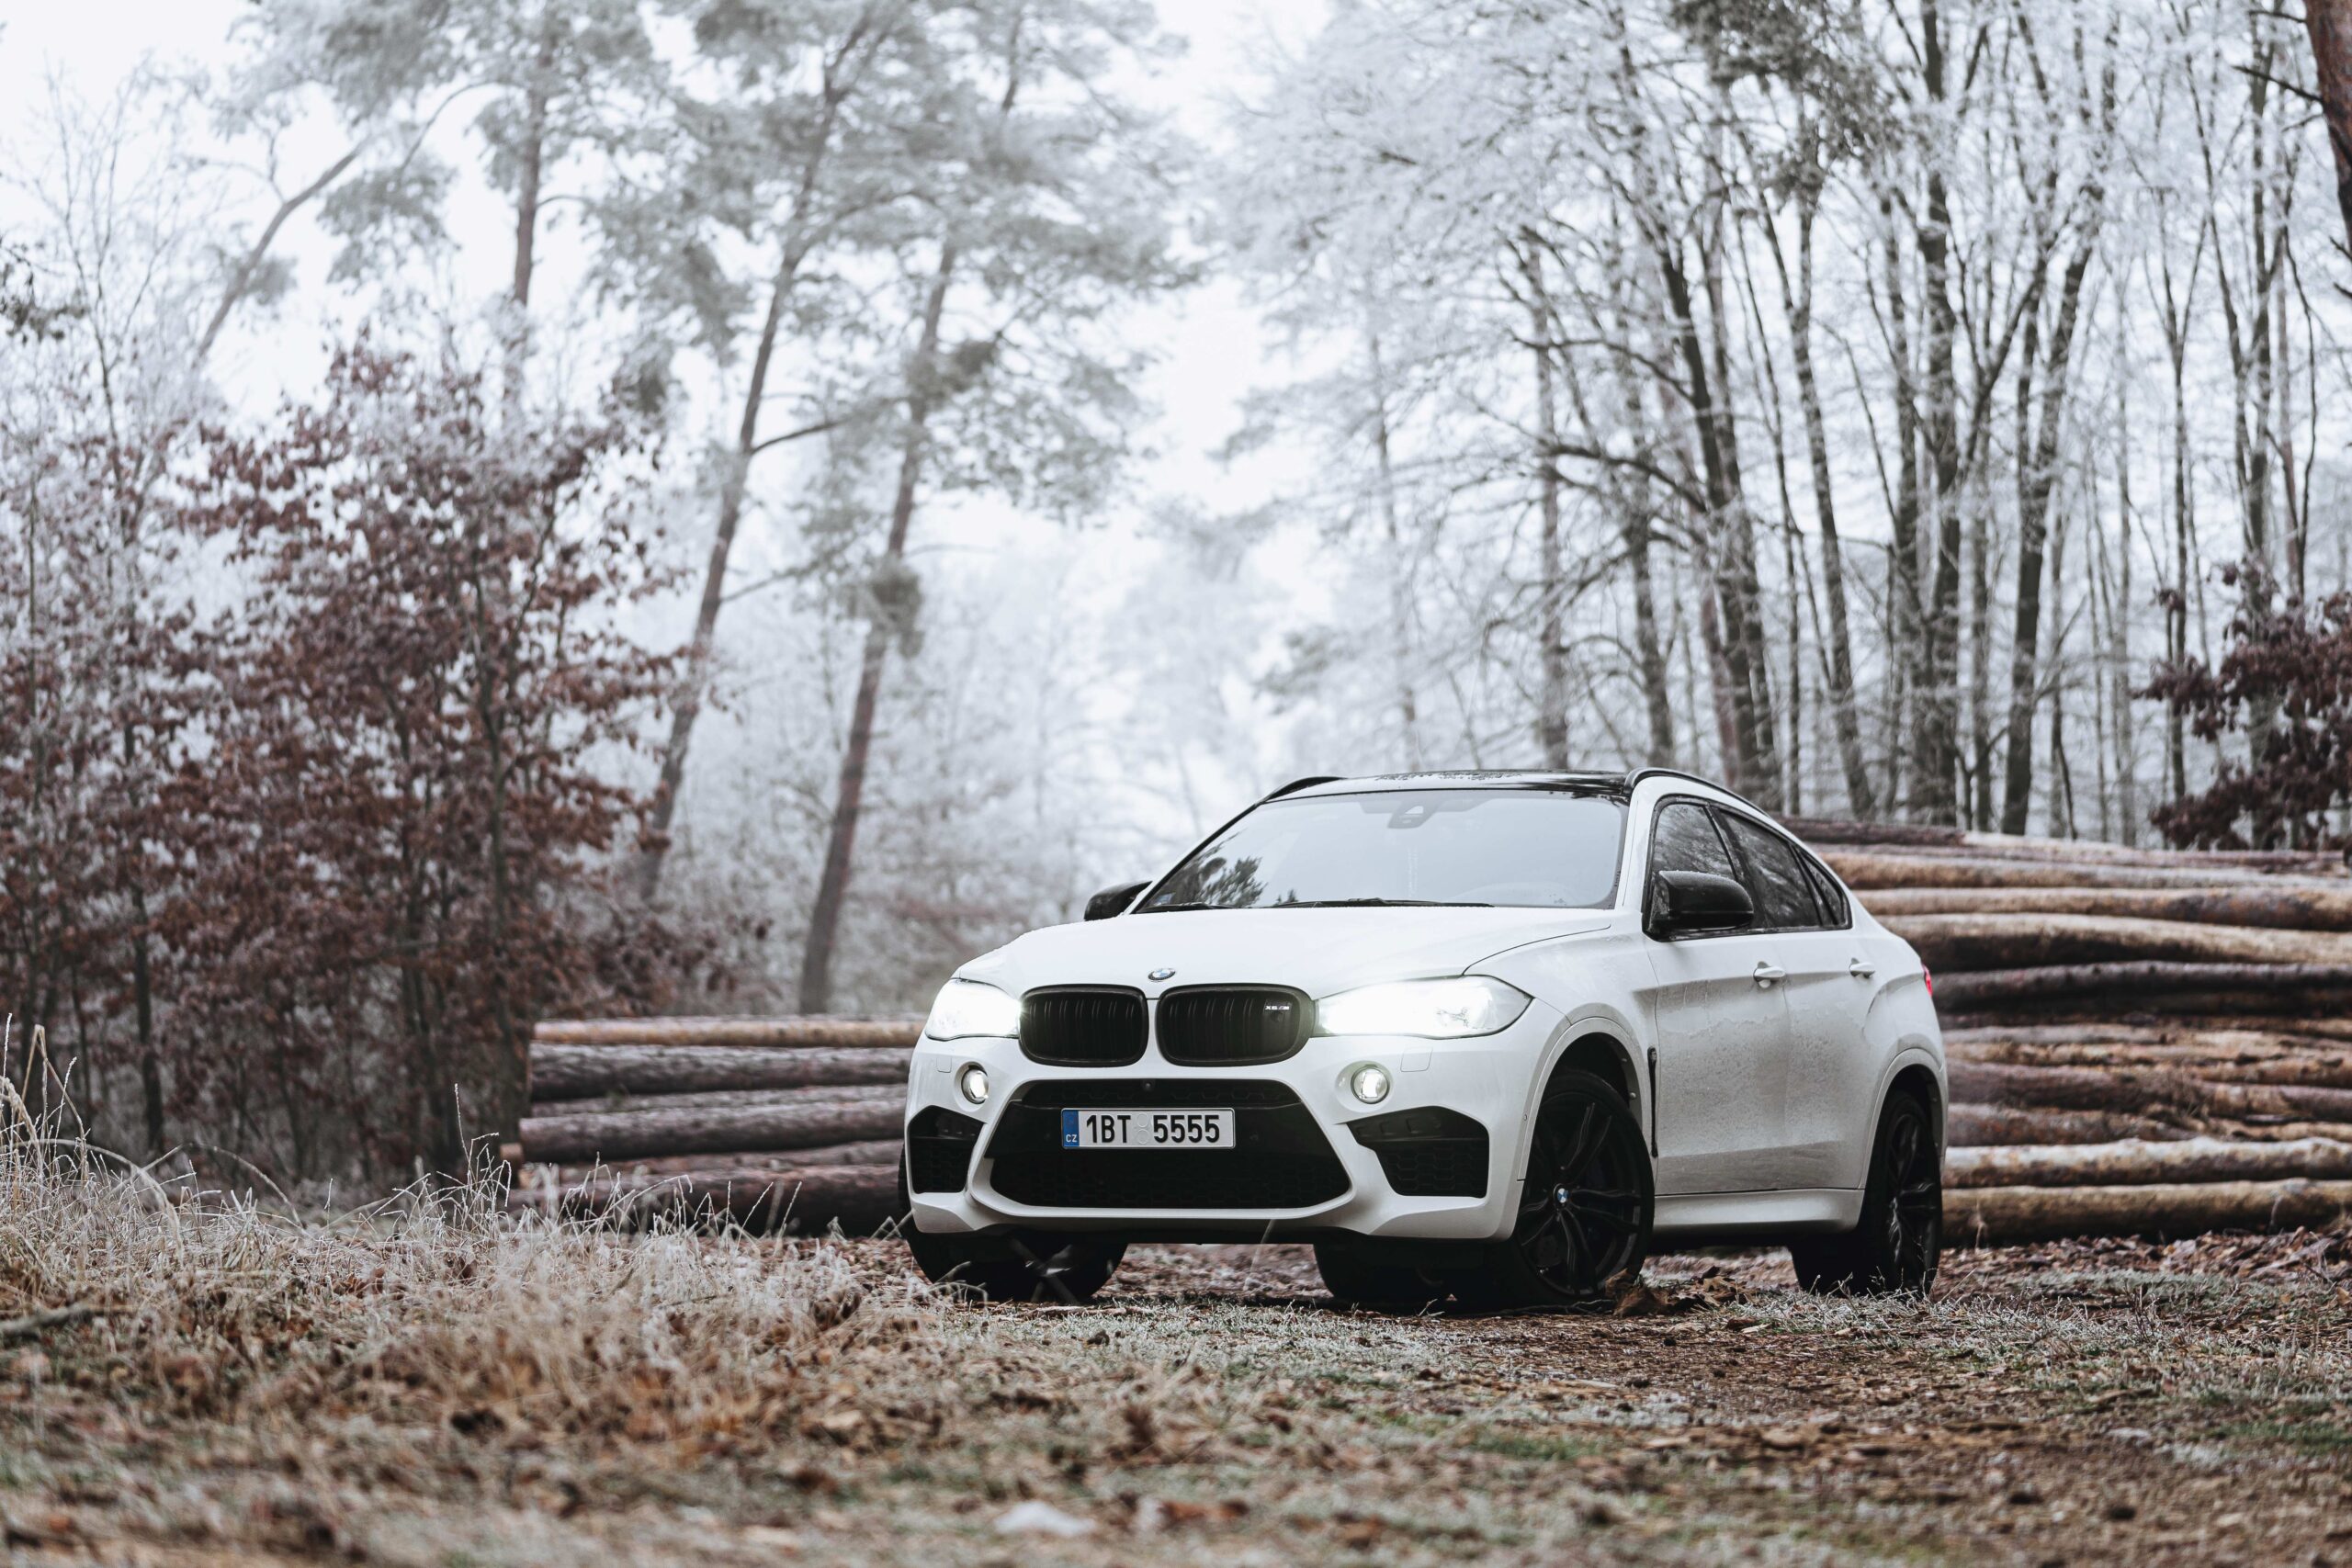 A white BMW SUV with all-season tires parked in a wintry location.